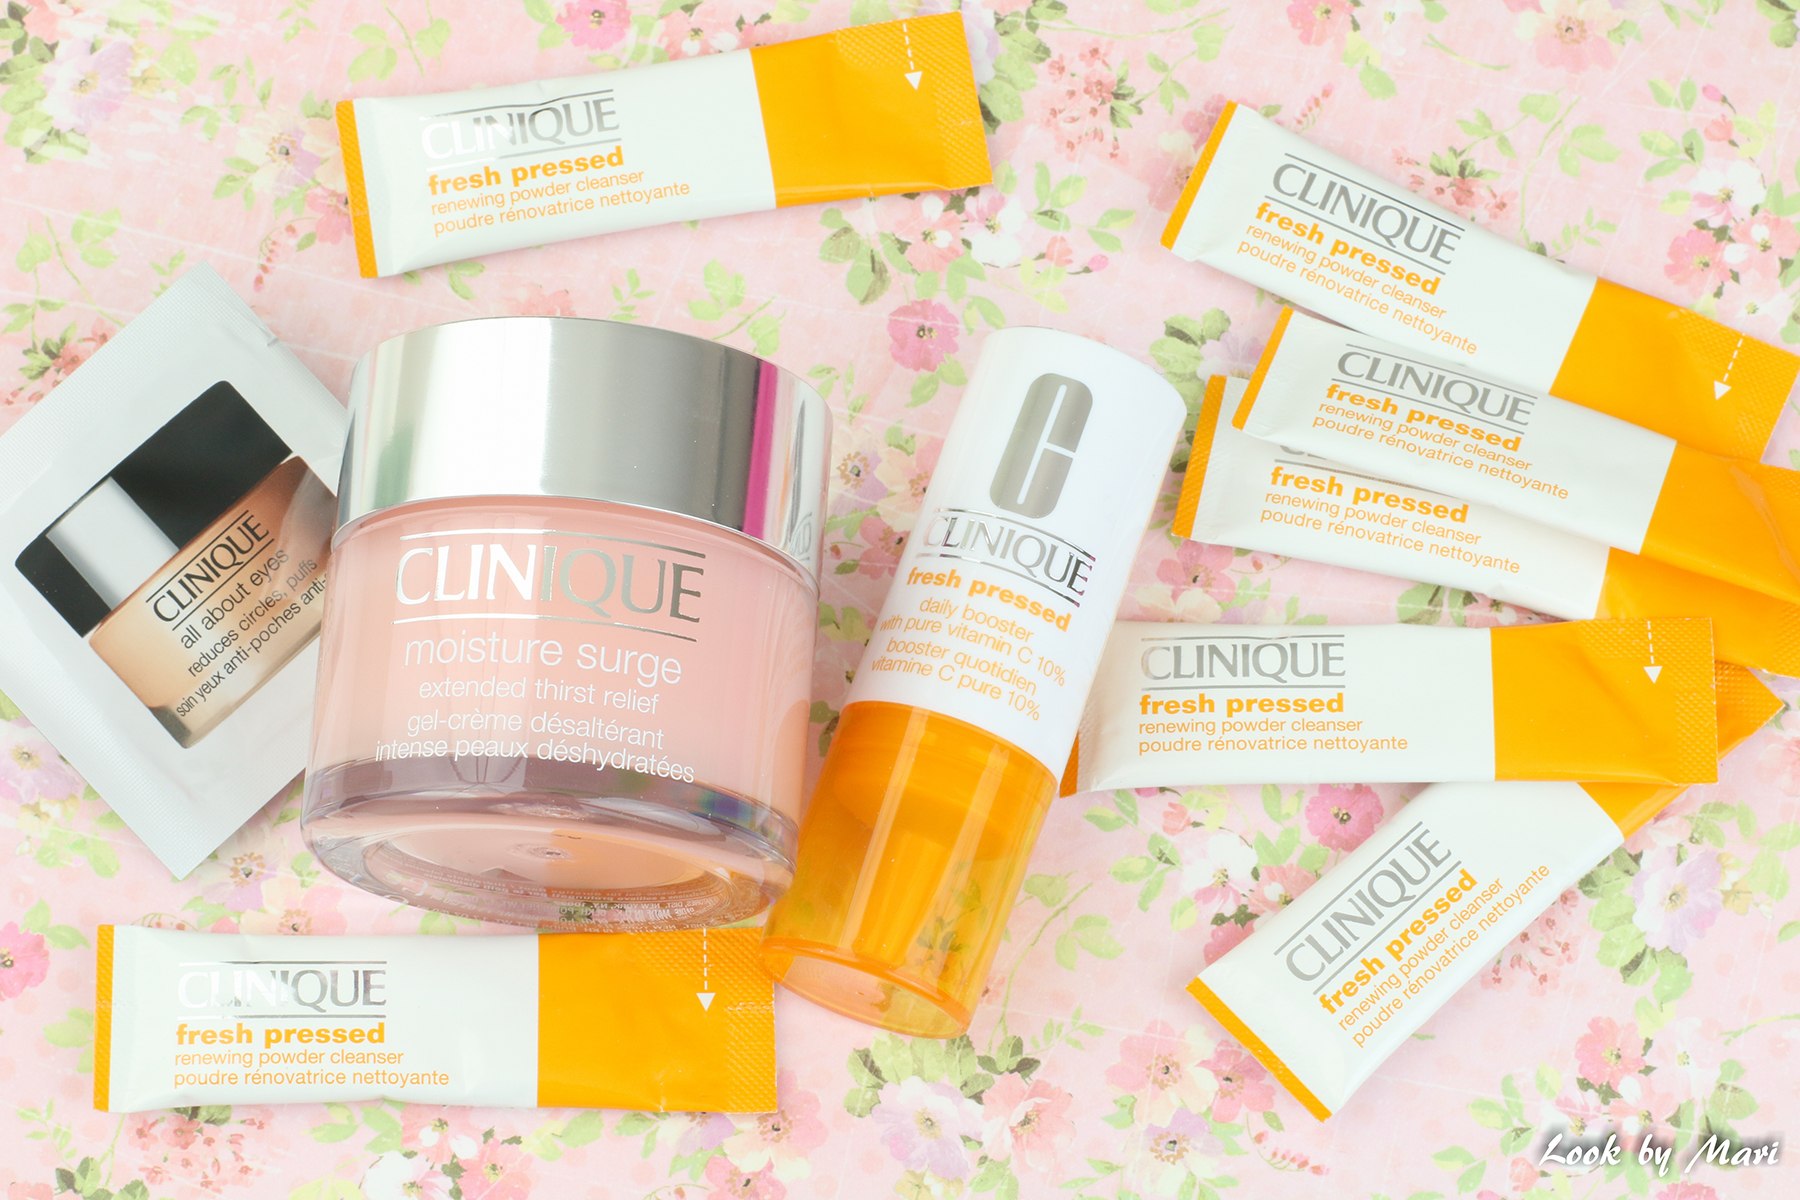 23 clinique fresh pressed 7 day system with pure vitamin c kokemuksia review moisture surge extended thrist relief